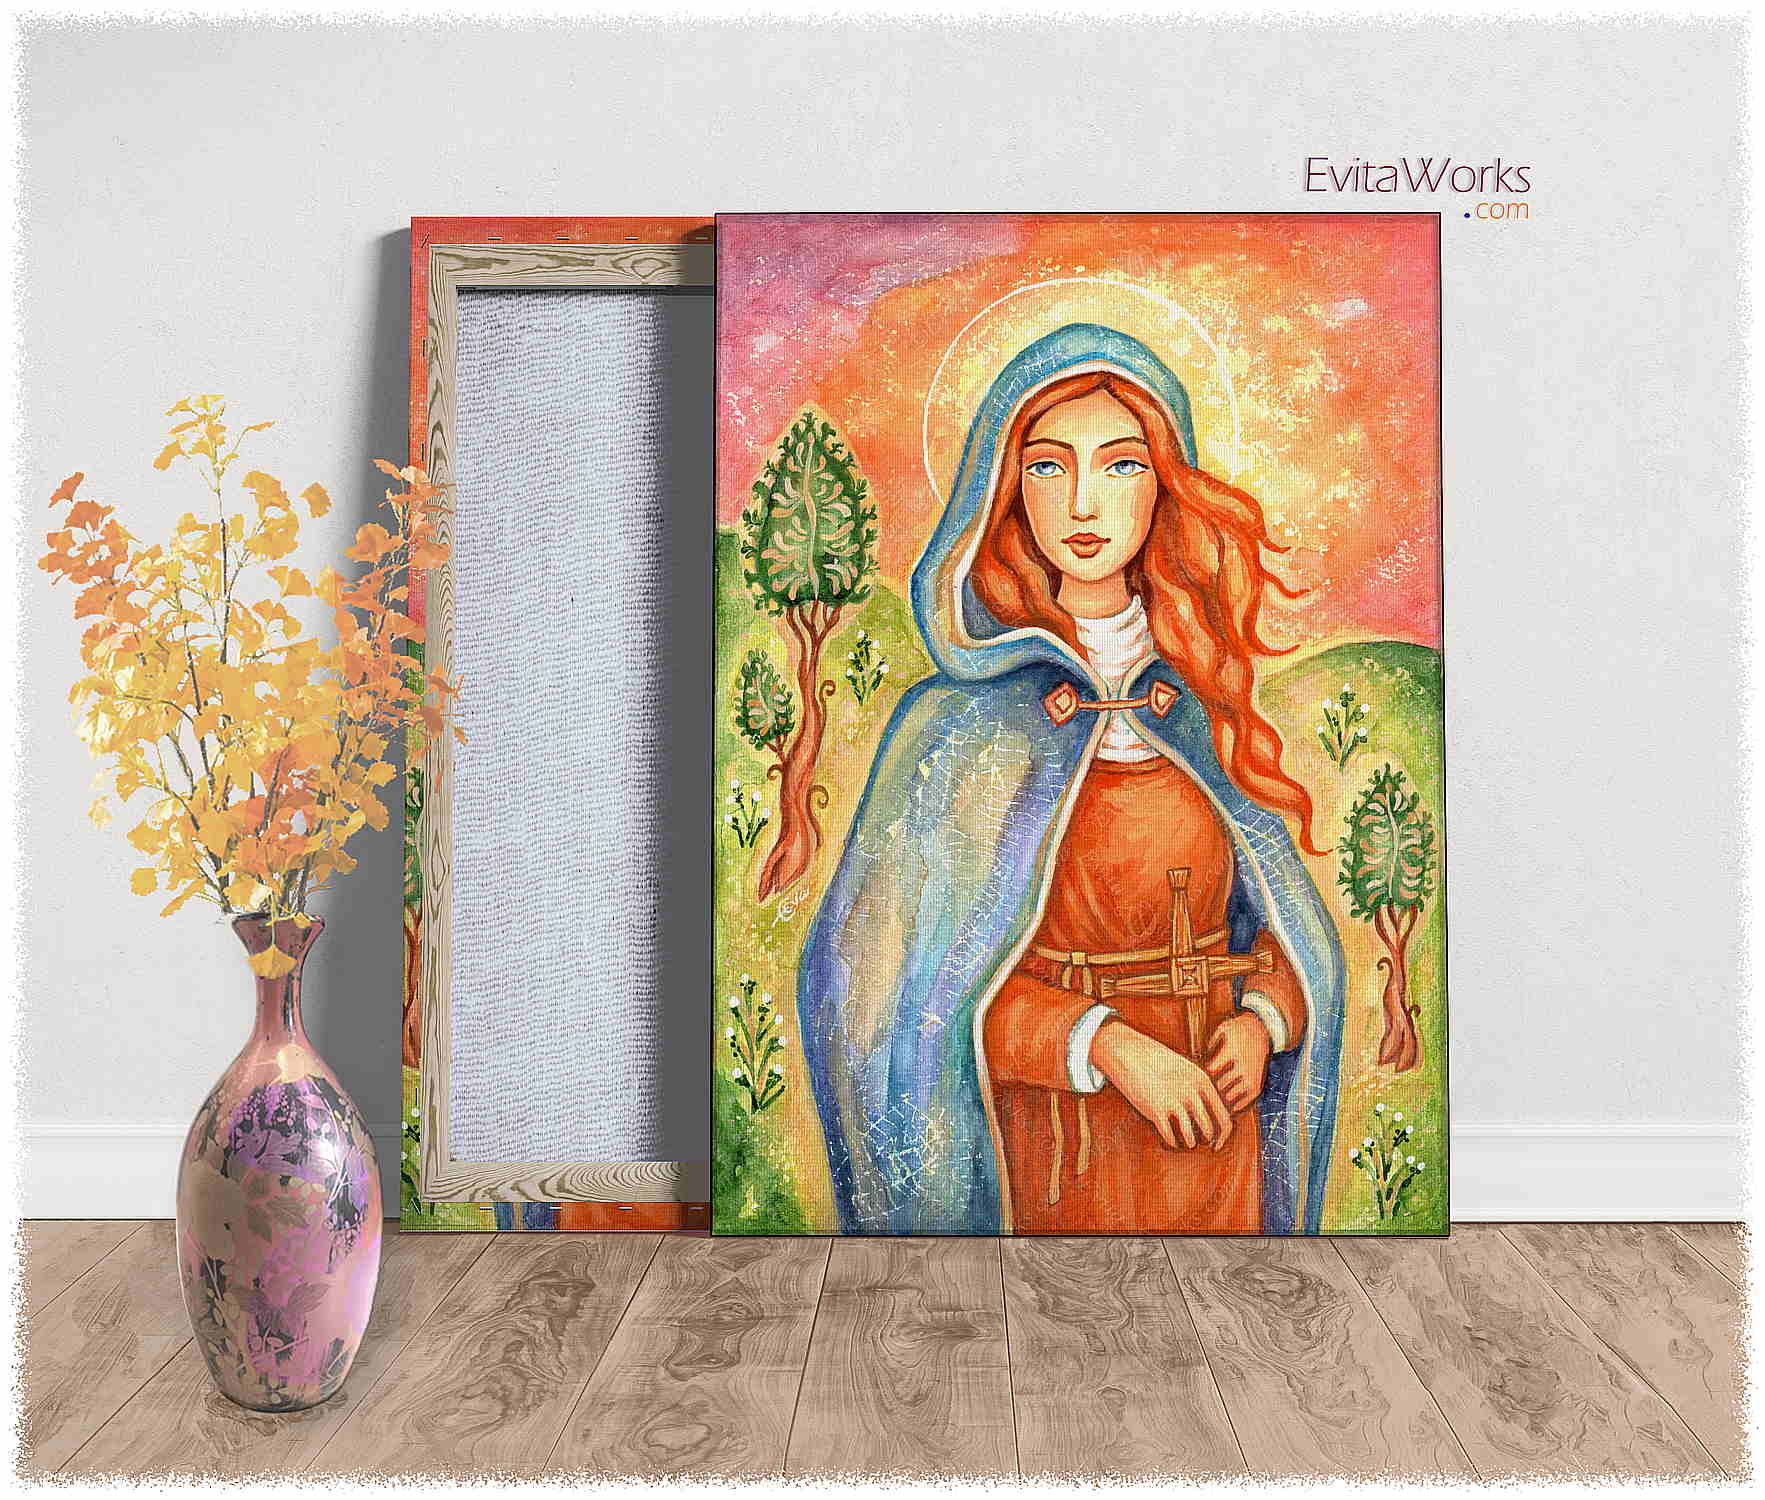 Hit to learn about "Saint Brigit of Ireland, Irish holy woman" on canvases